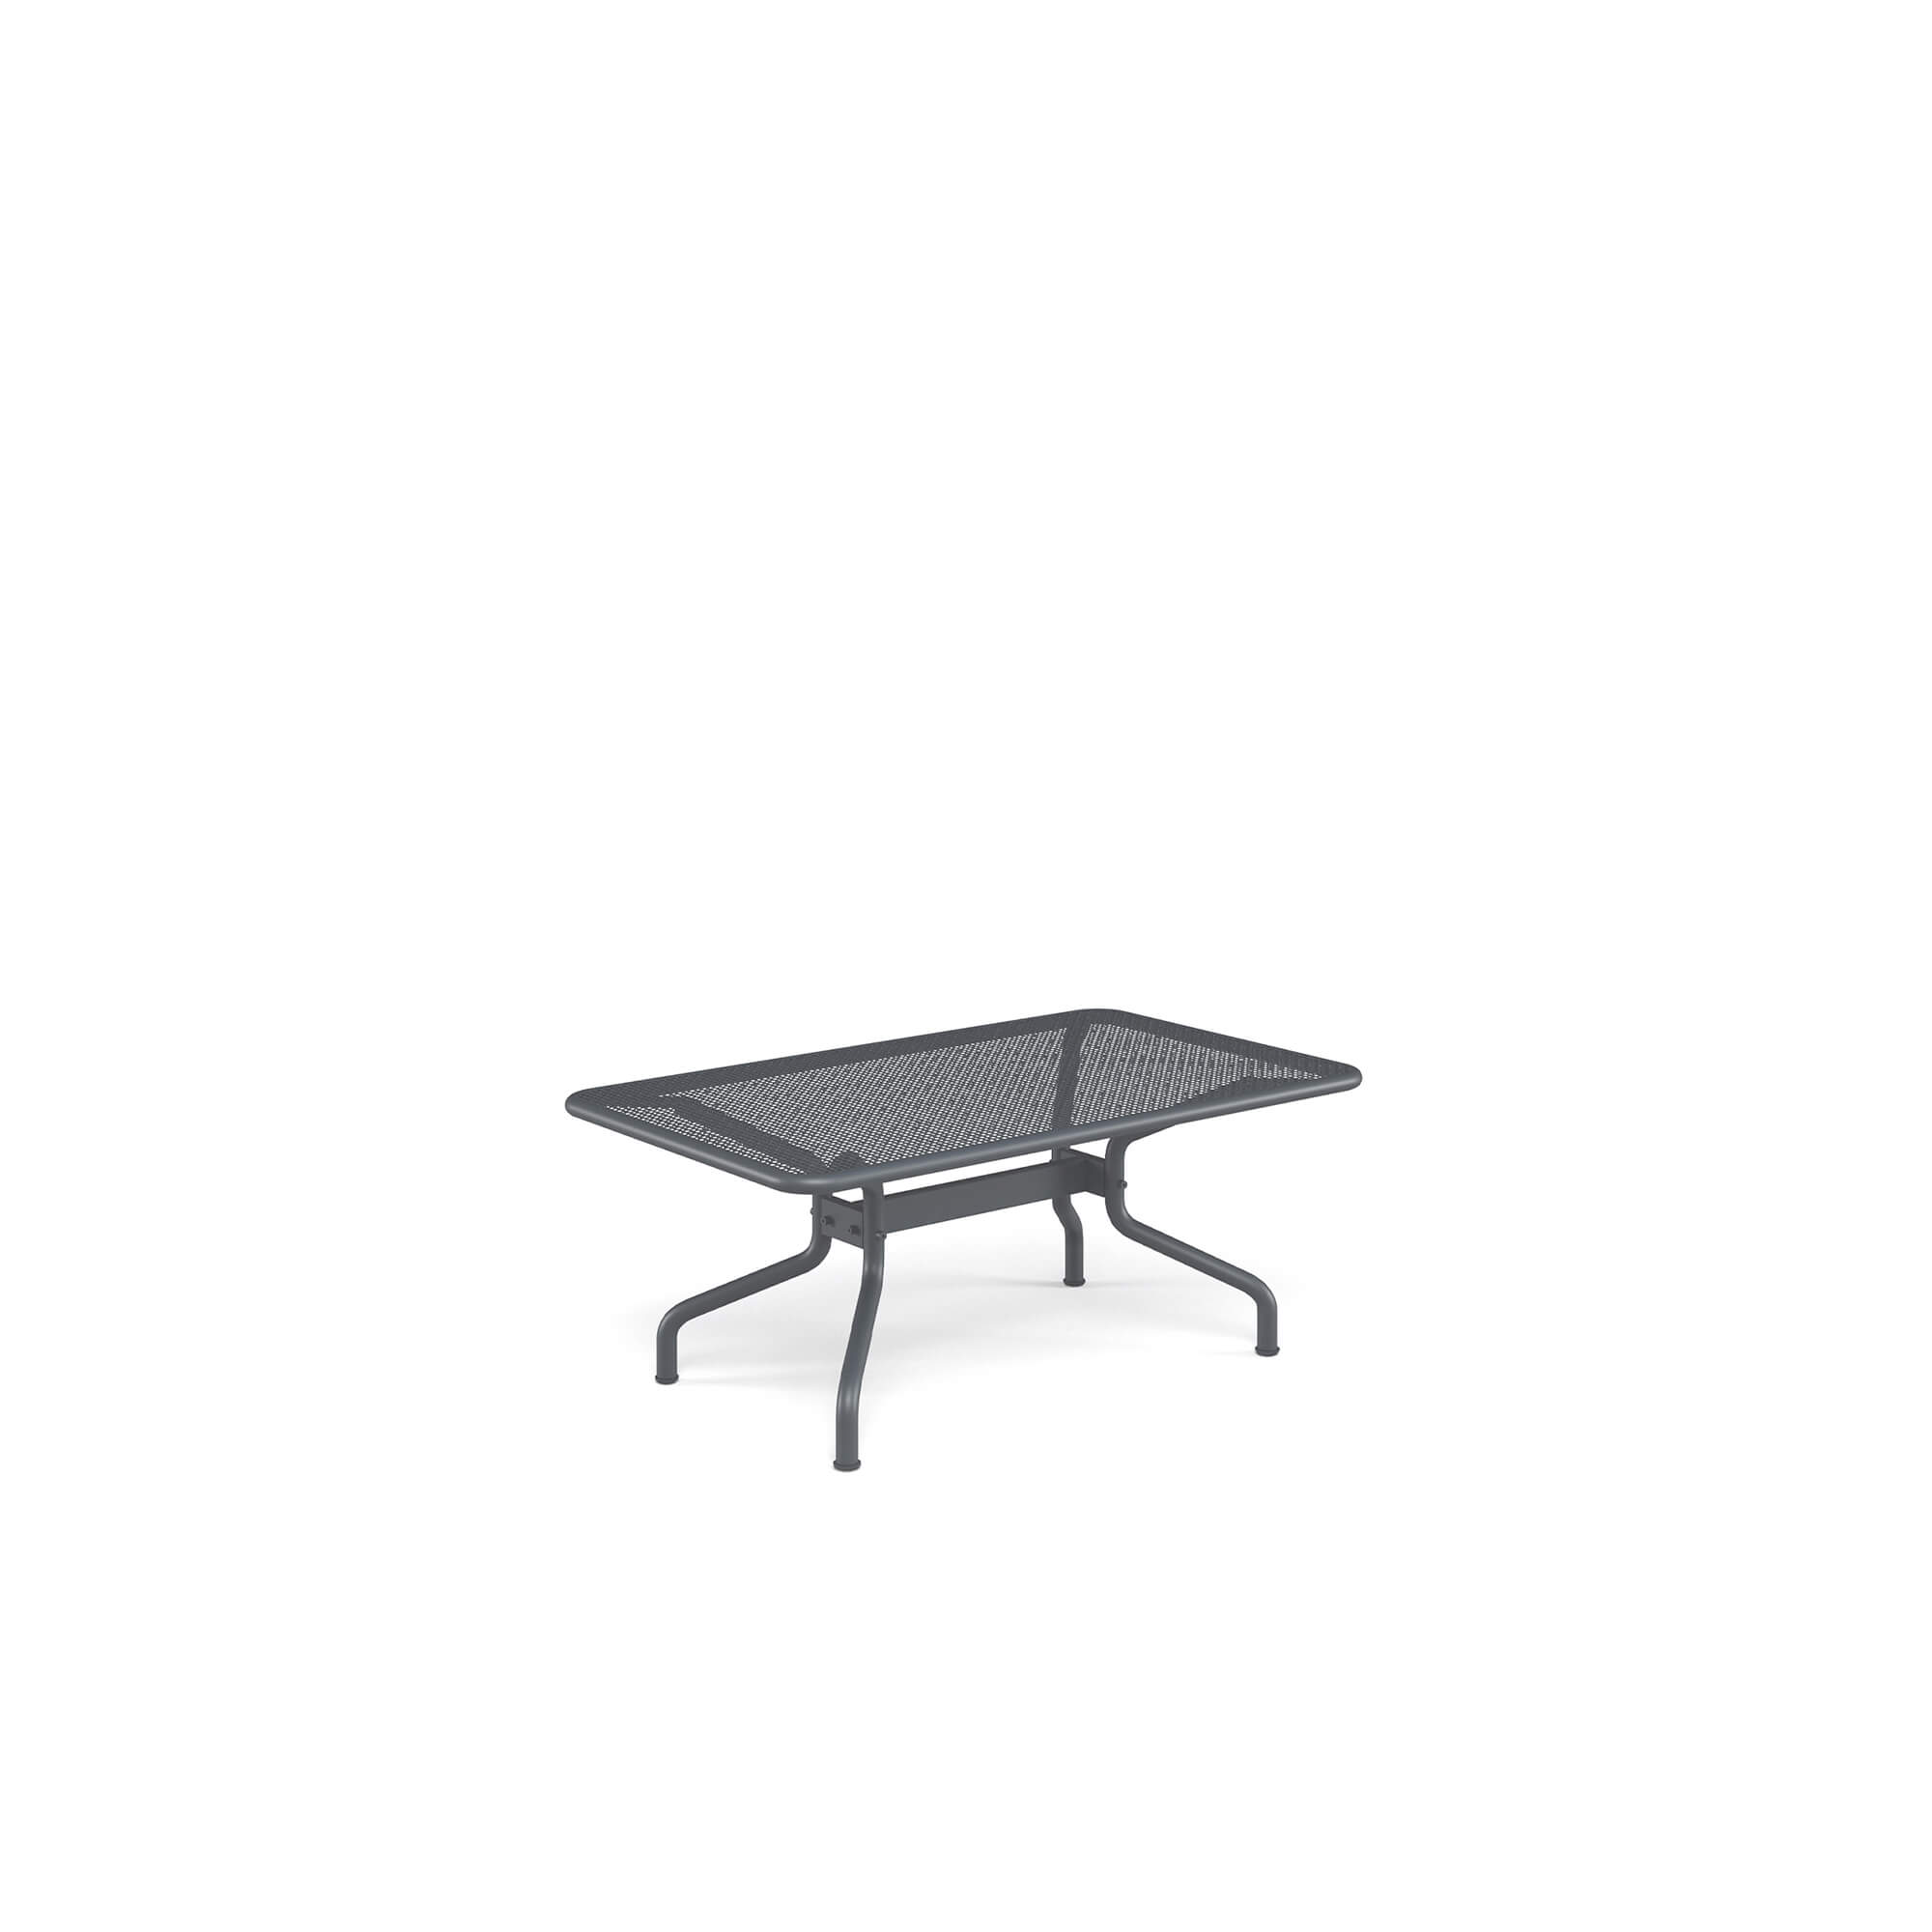 Garden coffee table 100x60 / outside in Steel - Collection Athena